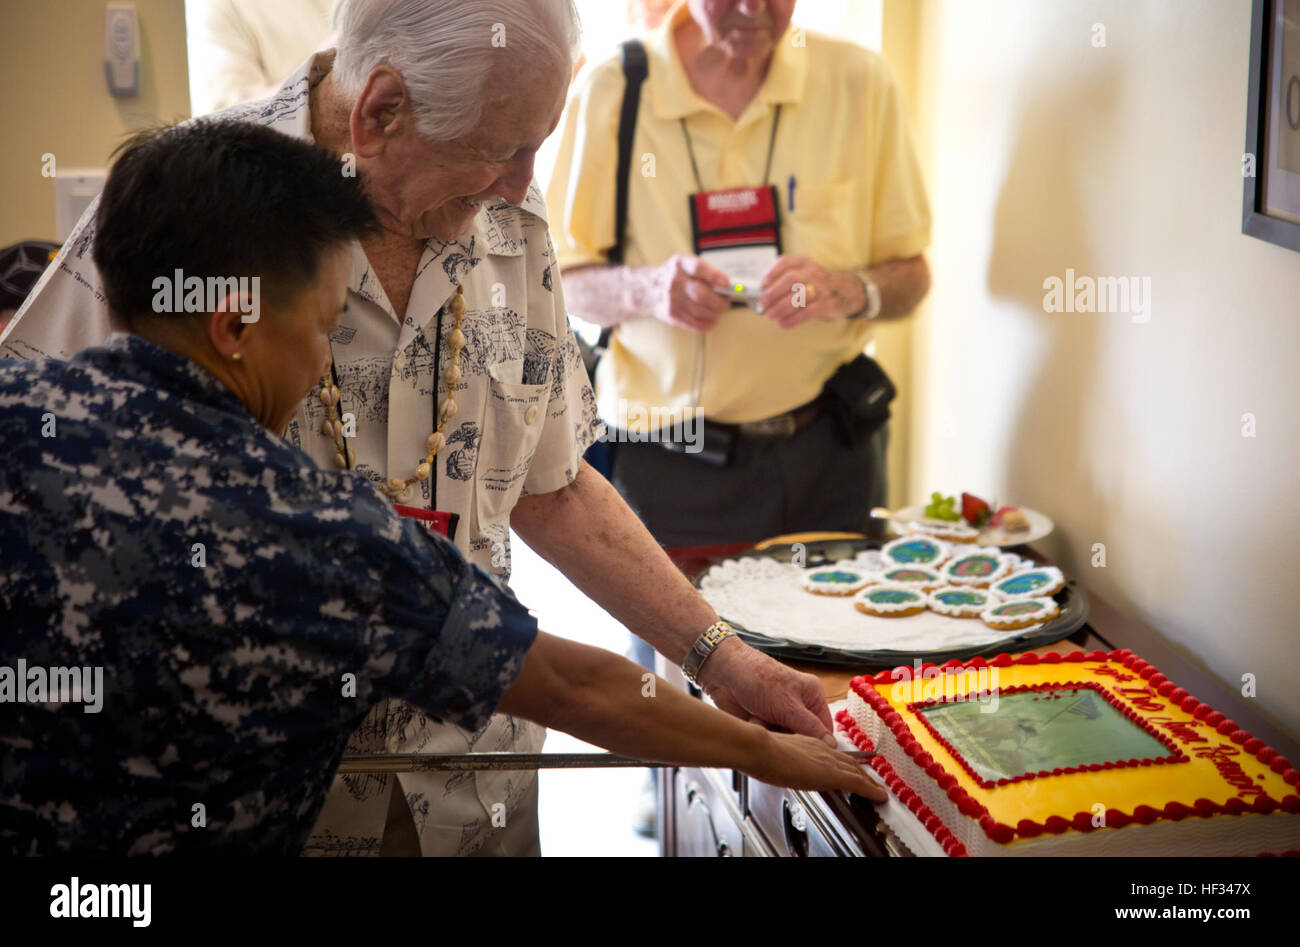 Rear Admiral Bette Bolivar, commander of Joint Region Marinas, and retired Lt. Gen. Lawrence Snowden cut a cake with a ceremonial sword during a luncheon at the admiral's home. The veterans stopped on top of Nimitz Hill for a quick lunch, refreshments and a slice of cake during their tour visiting war memorials and battle sites. The group then traveled to Iwo Jima, now known officially as Ioto, commemorating the 70th anniversary of the Battle of Iwo Jima. (U.S. Marine Corps photo by Lance Cpl. Jacob Snouffer/Released) Iwo Jima veterans luncheon 150319-M-WW824-201 Stock Photo